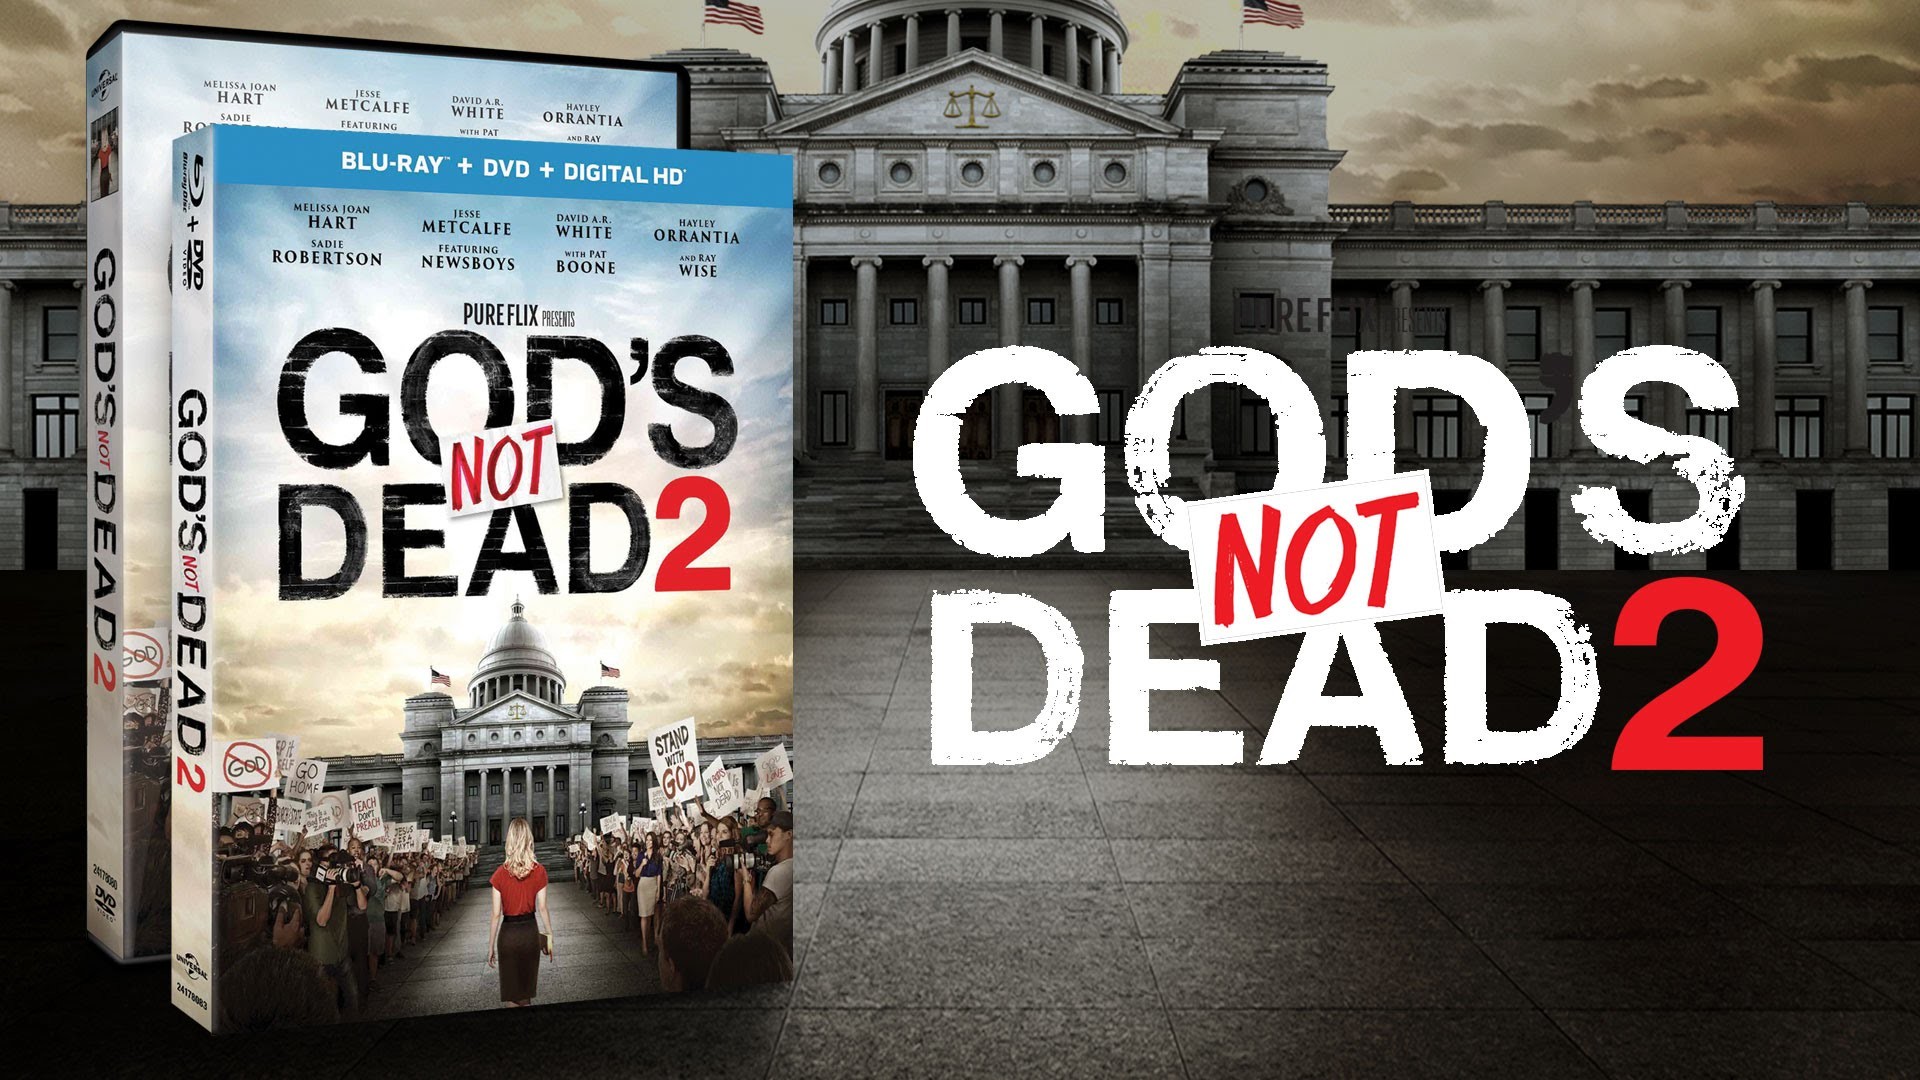 Gods Not Dead 2 Available Now On Blu ray / DVD